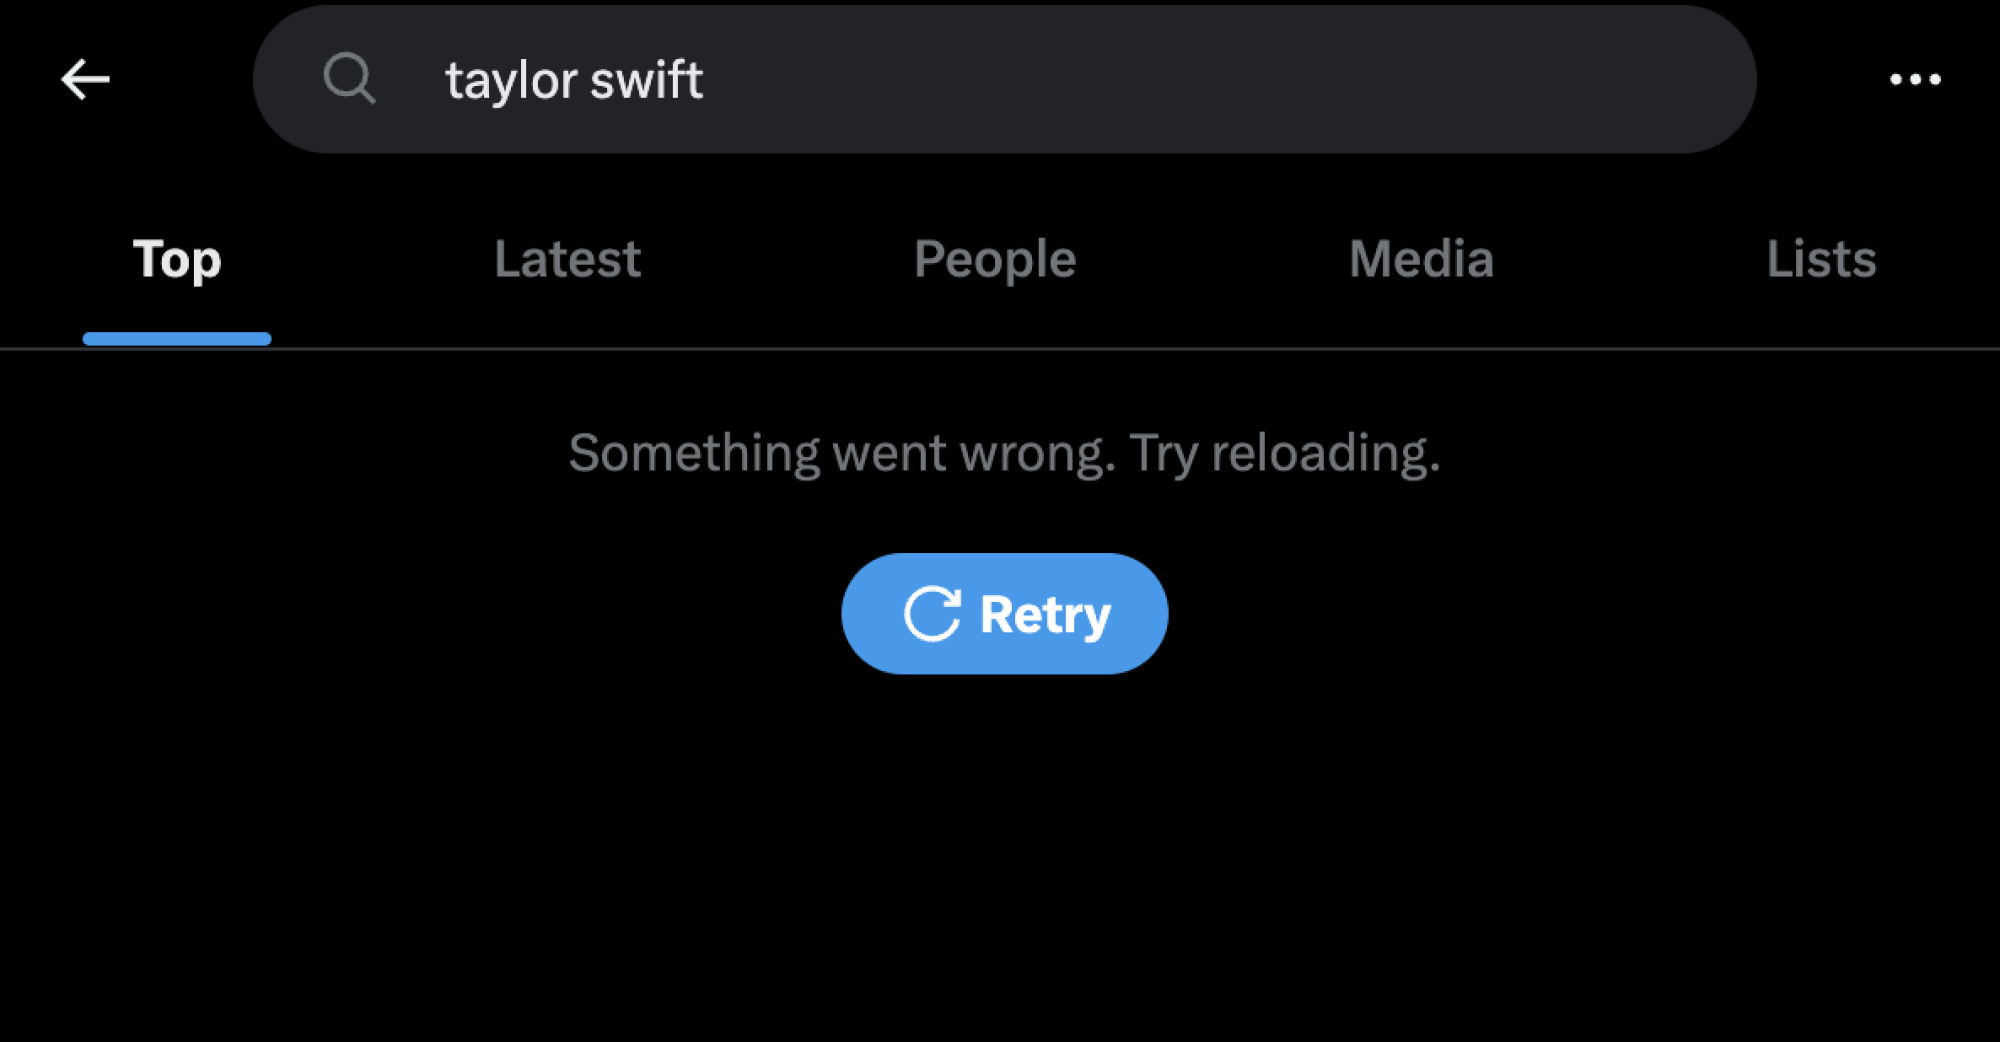 taylor swift search on x with text "something went wrong. try reloading" error text below.